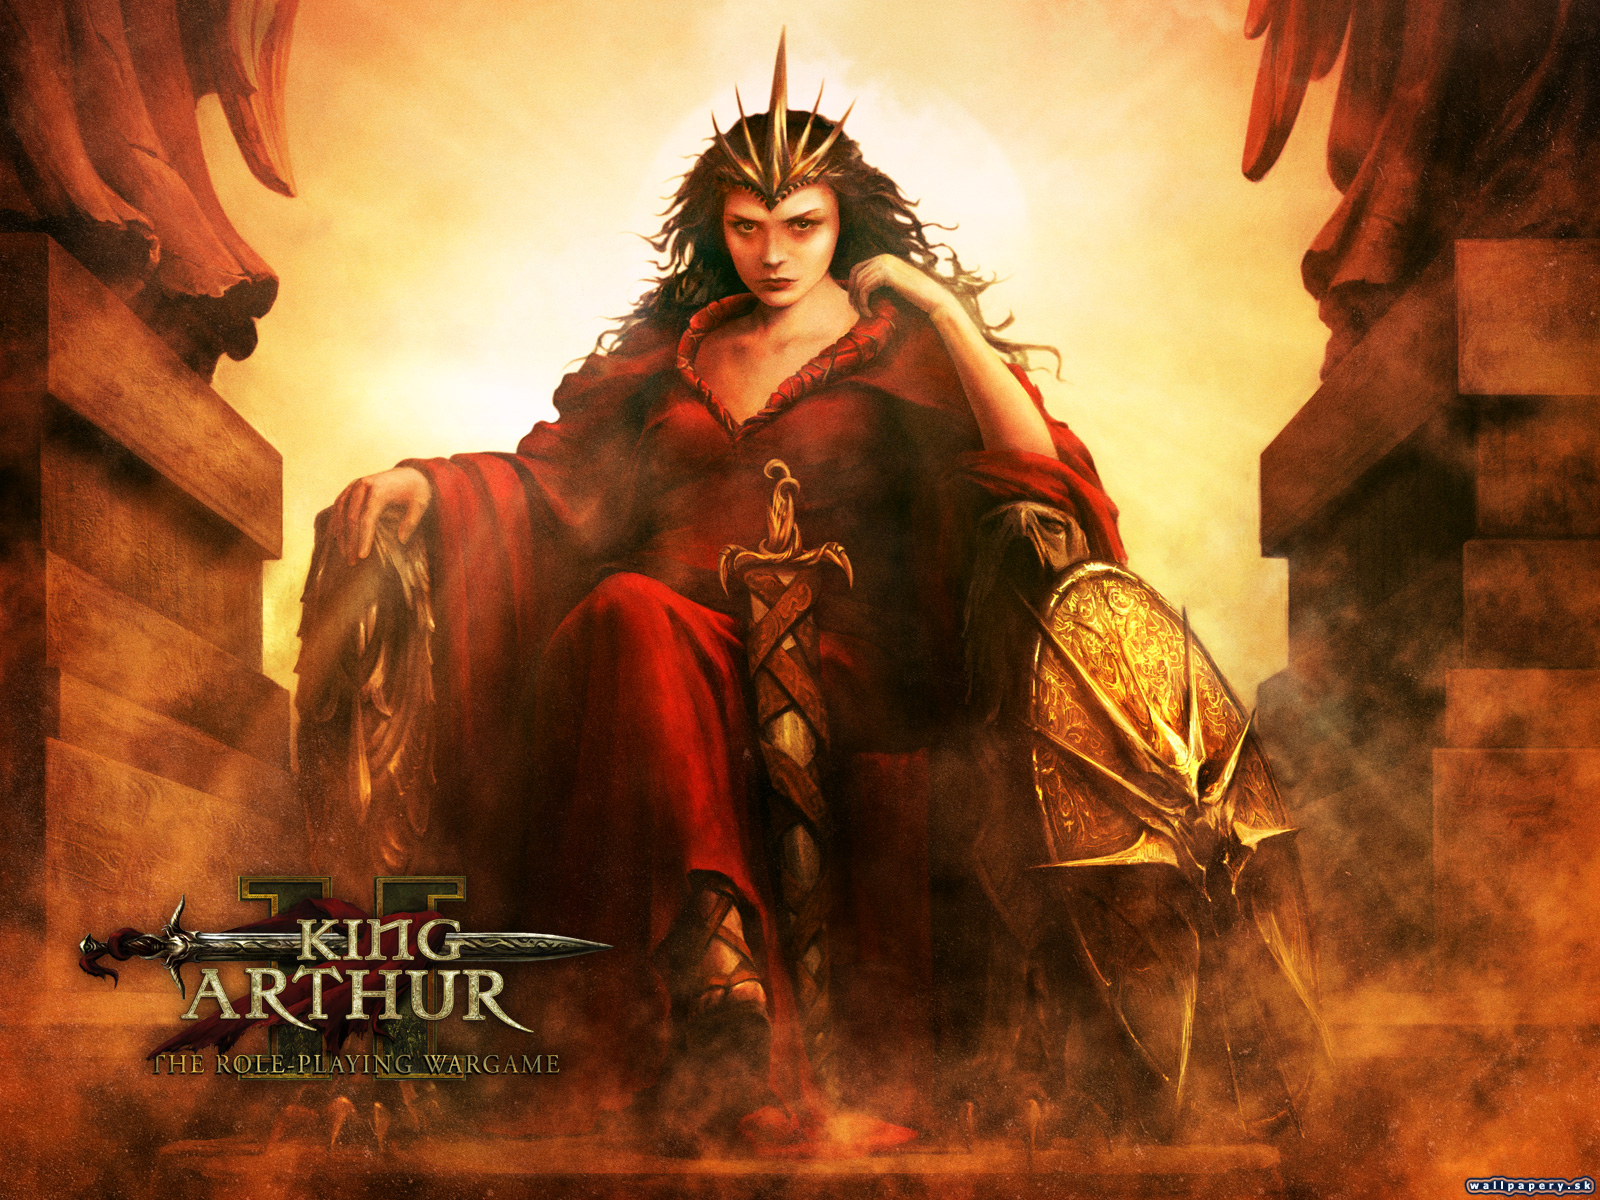 King Arthur II: The Role-playing Wargame - wallpaper 3